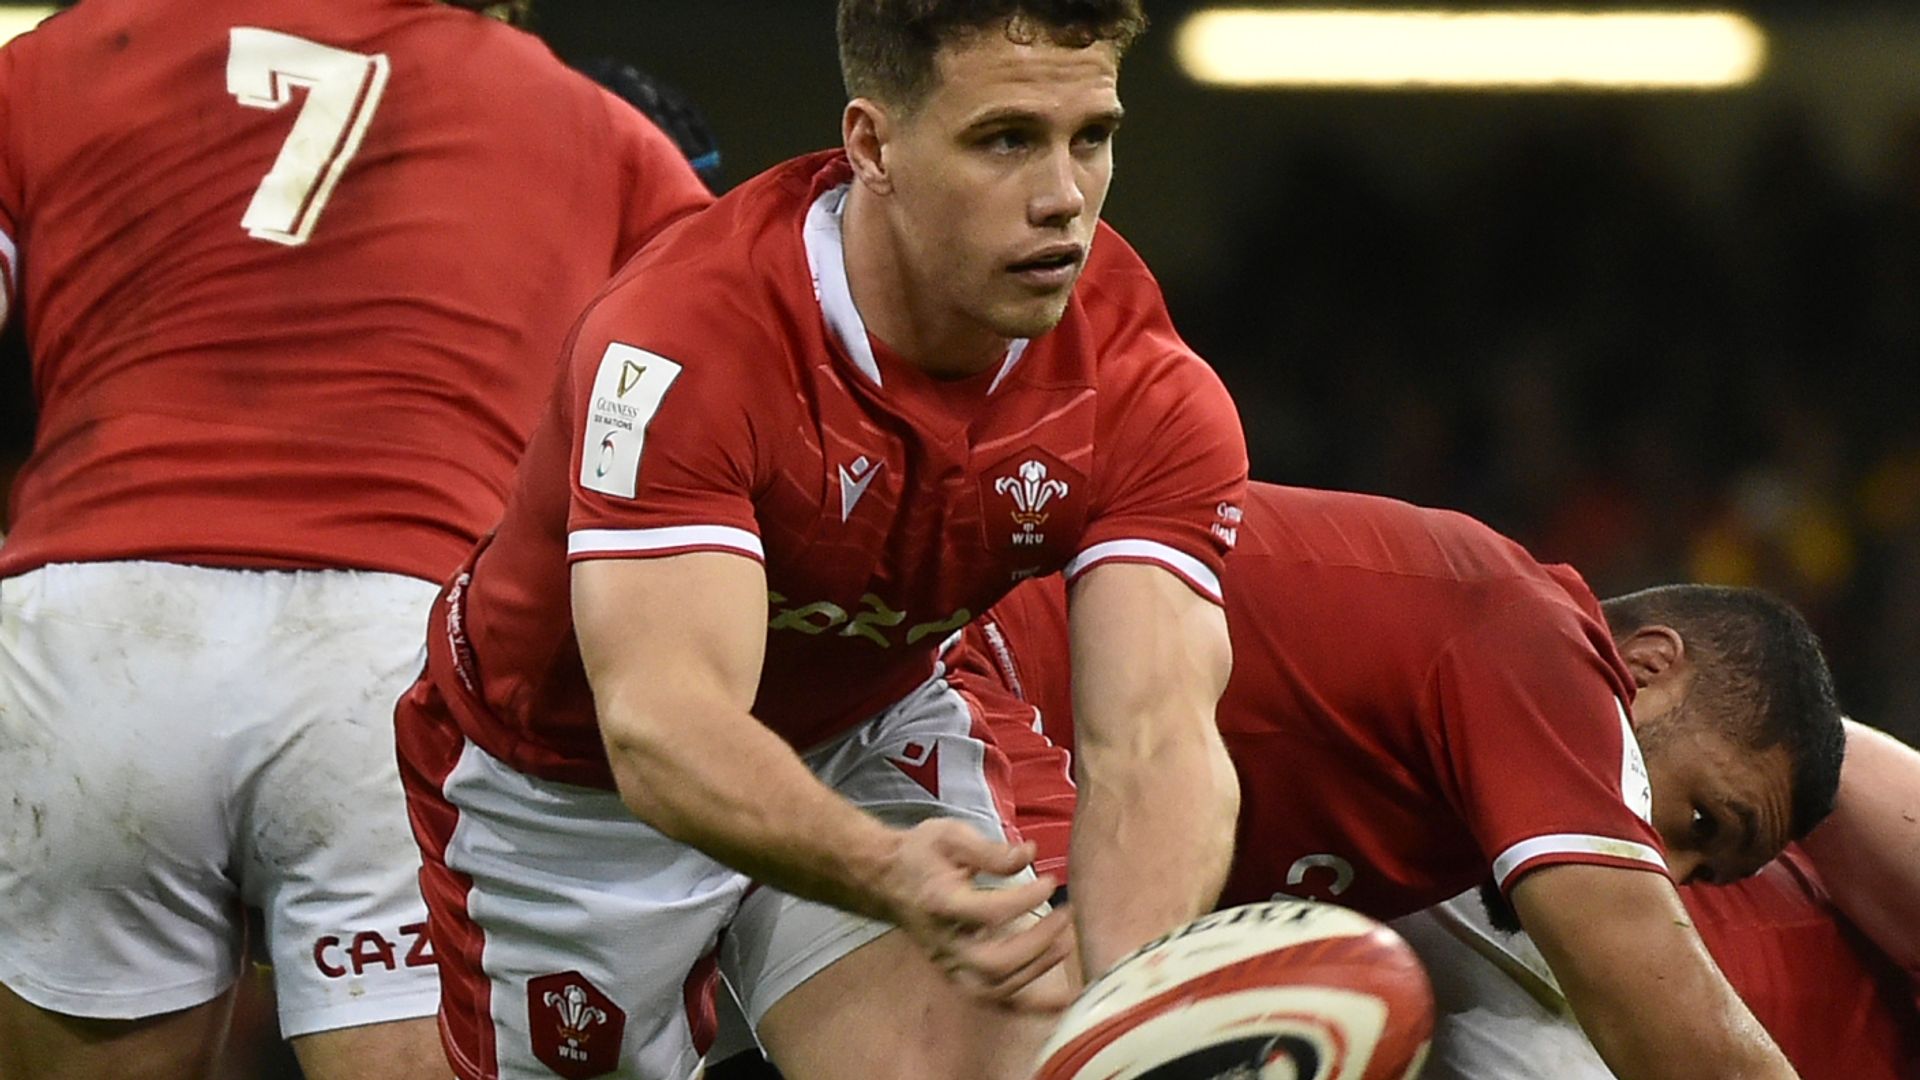 Harm-hit Wales eyeing South Africa upset | ‘Do not write us off!’SkySports | Information